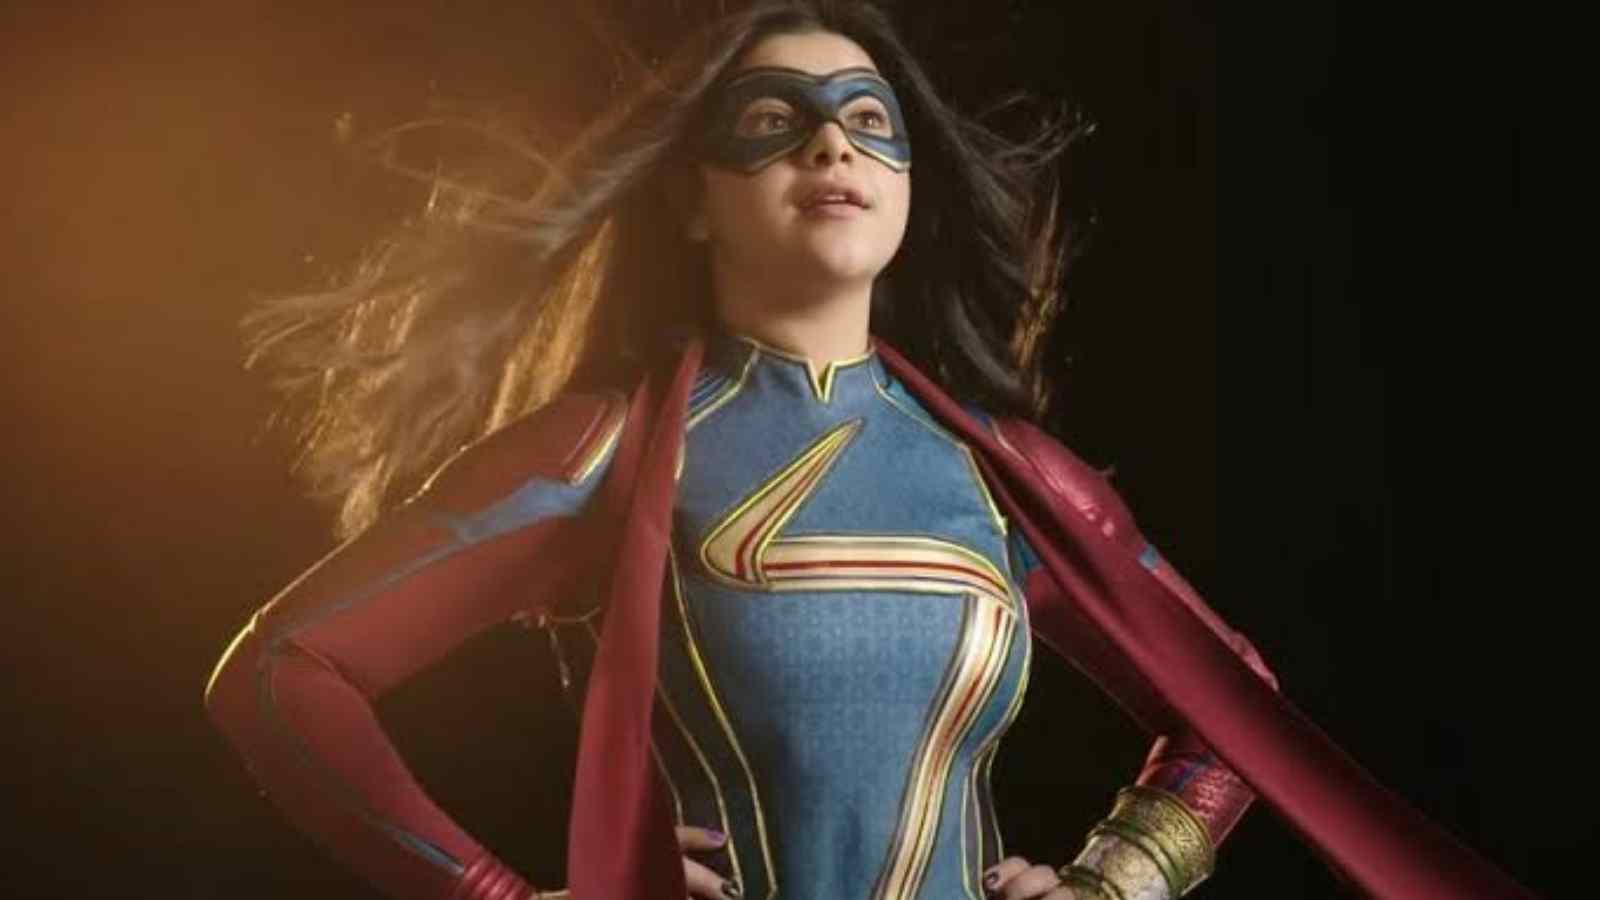 Ms. Marvel looks very stunning in all her glory